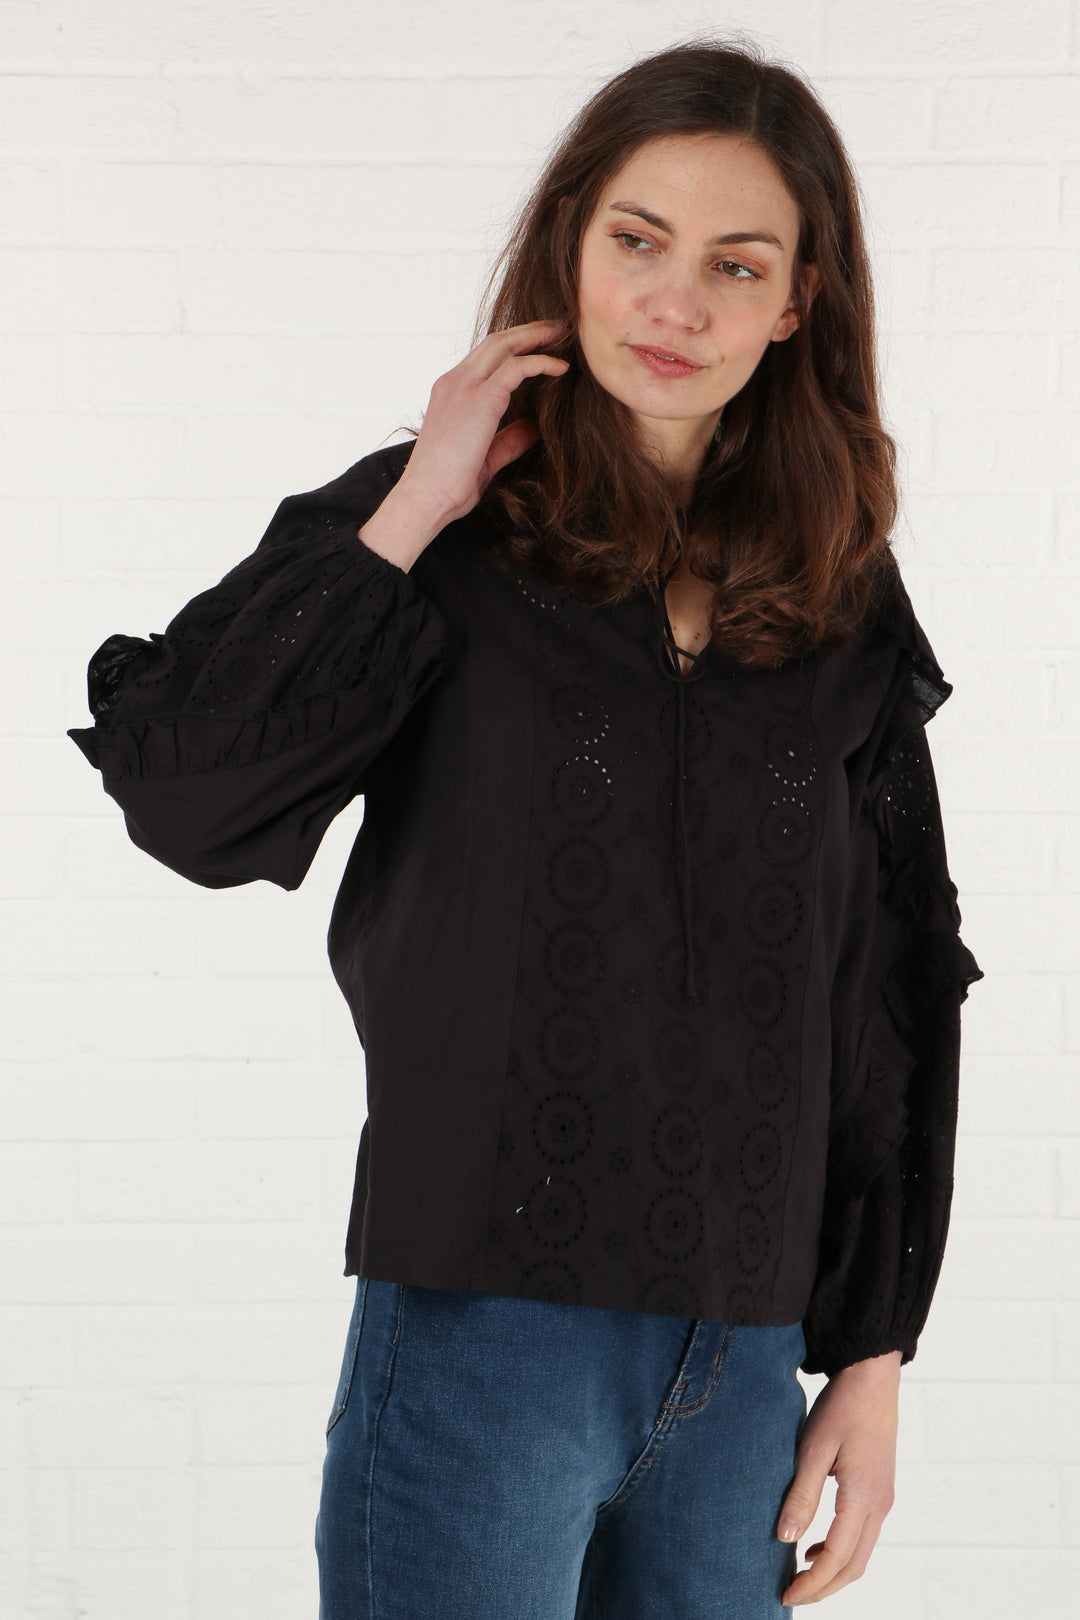 model wearing a black long sleeve cotton summer shirt with frill sleeves and broderie anglaise details